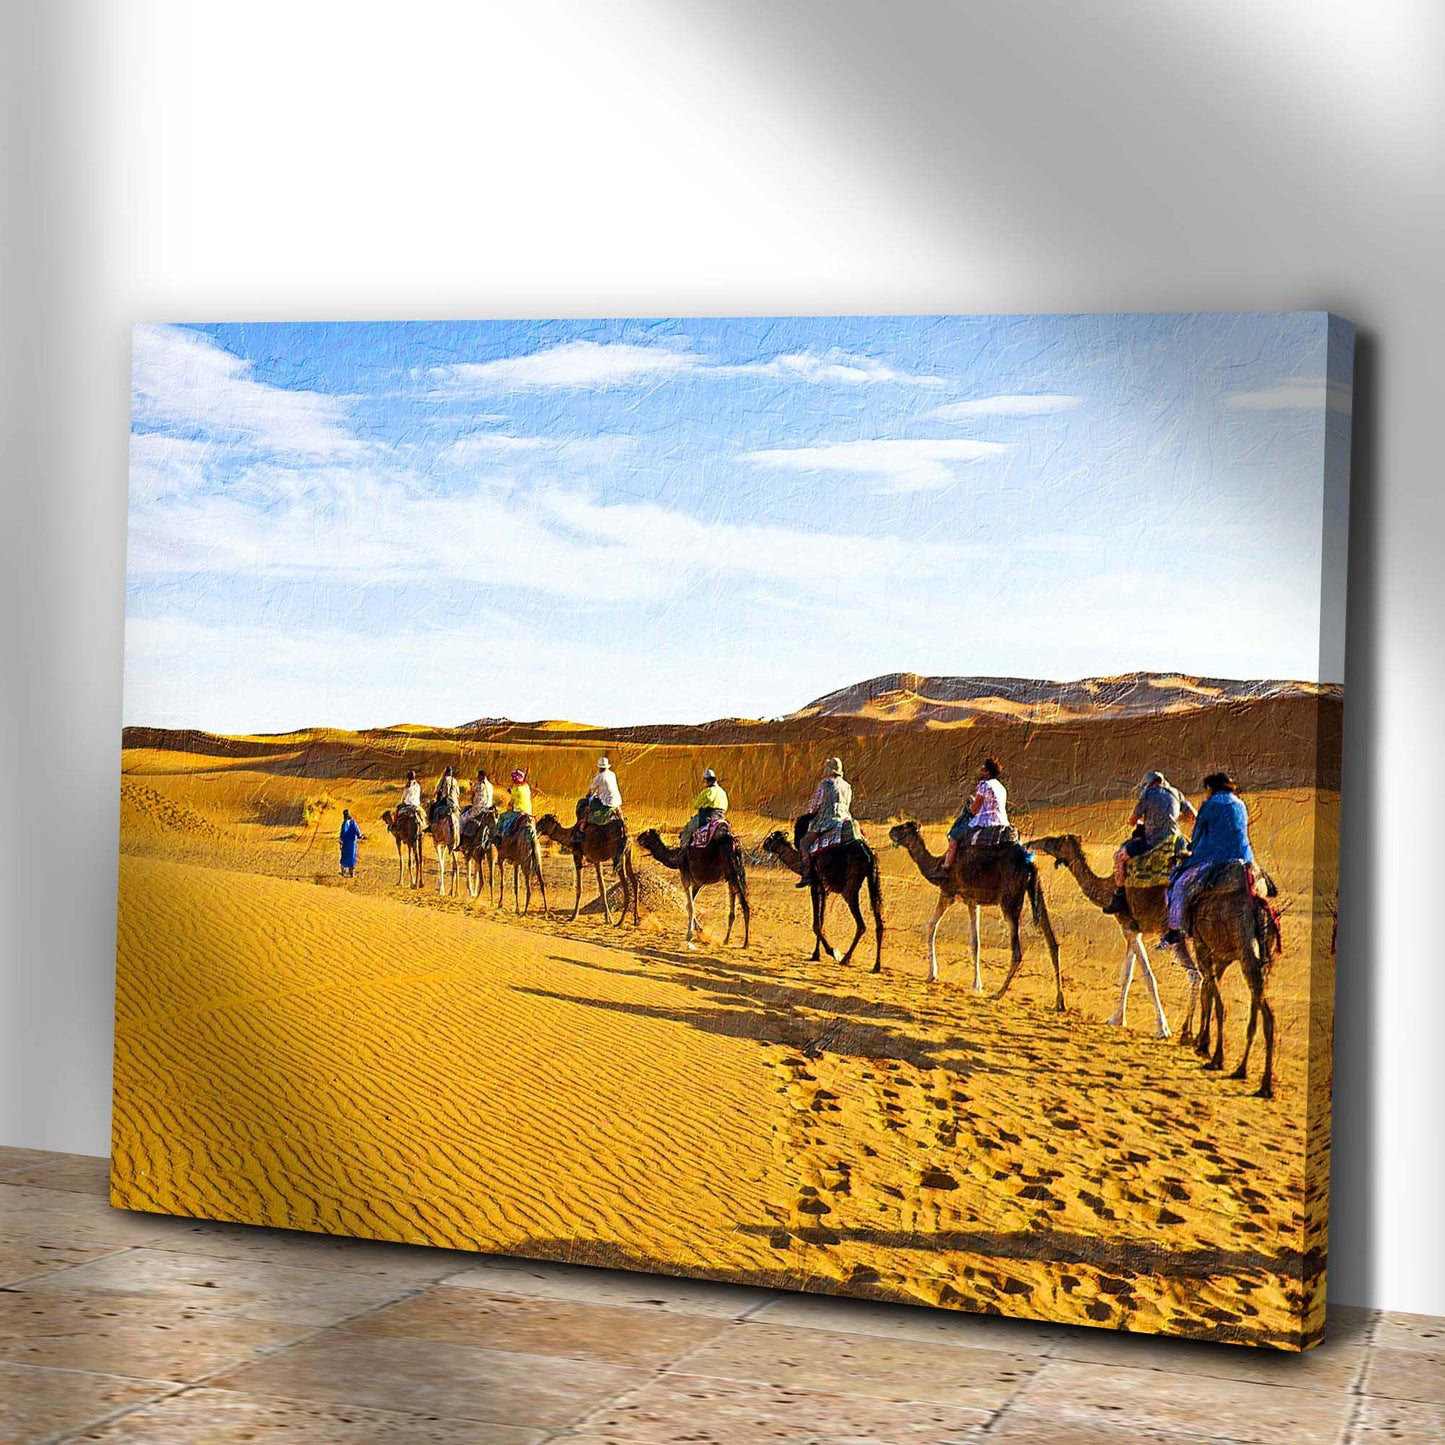 Camel Through Sand Dunes Canvas Wall Art Style 1 - Image by Tailored Canvases